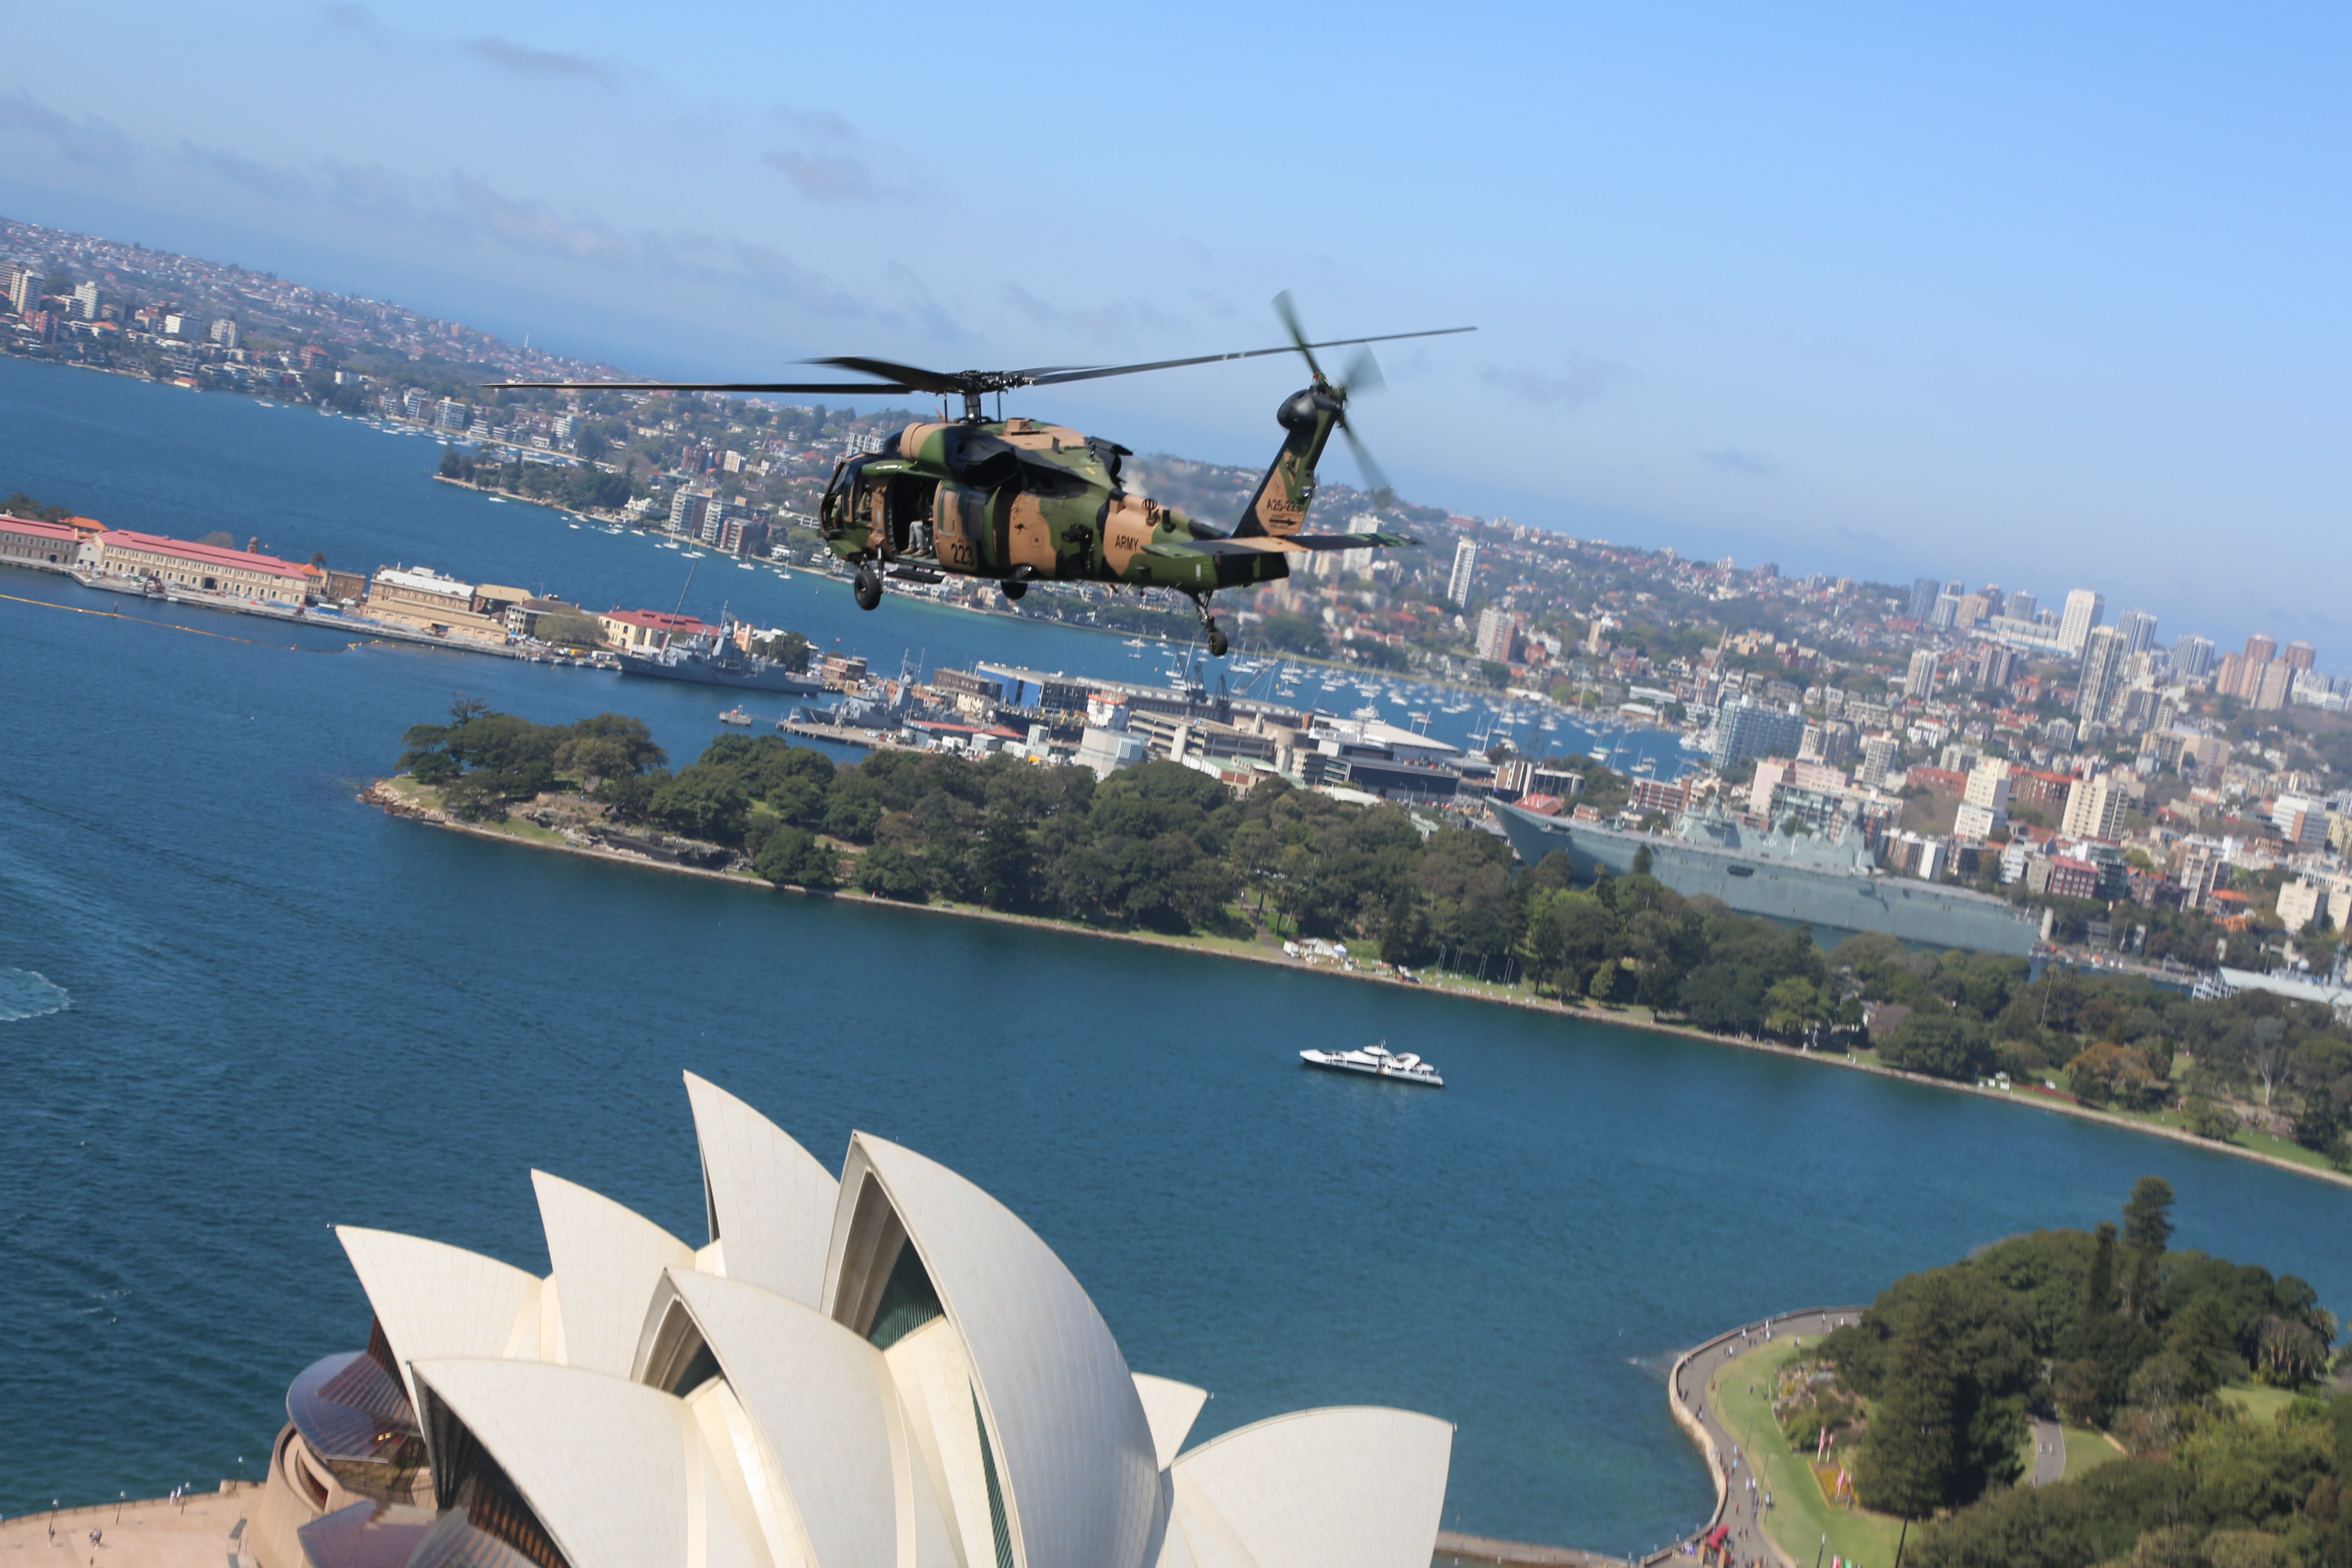 A Black Hawk helicopter over Sydney